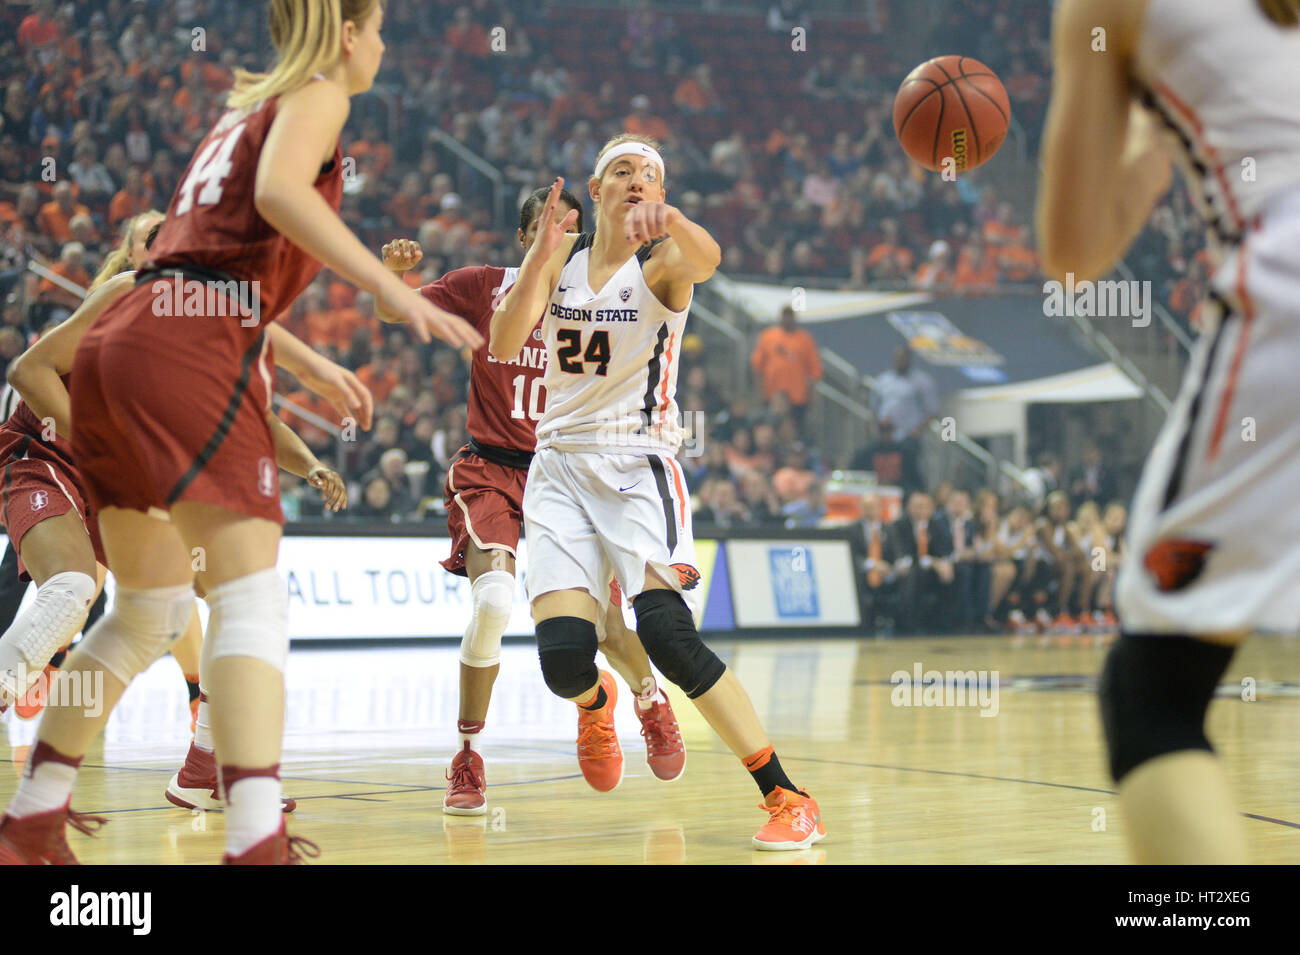 Seattle, WA, USA. 5th Mar, 2017. OSU's Sydney Wiese (24) drives down the lane then passes during the PAC12 women's tournament final between the Oregon State Beavers and the Stanford Cardinal. Stanford won the game 48-43. The game was played at Key Arena in Seattle, WA. Jeff Halstead/CSM/Alamy Live News Stock Photo